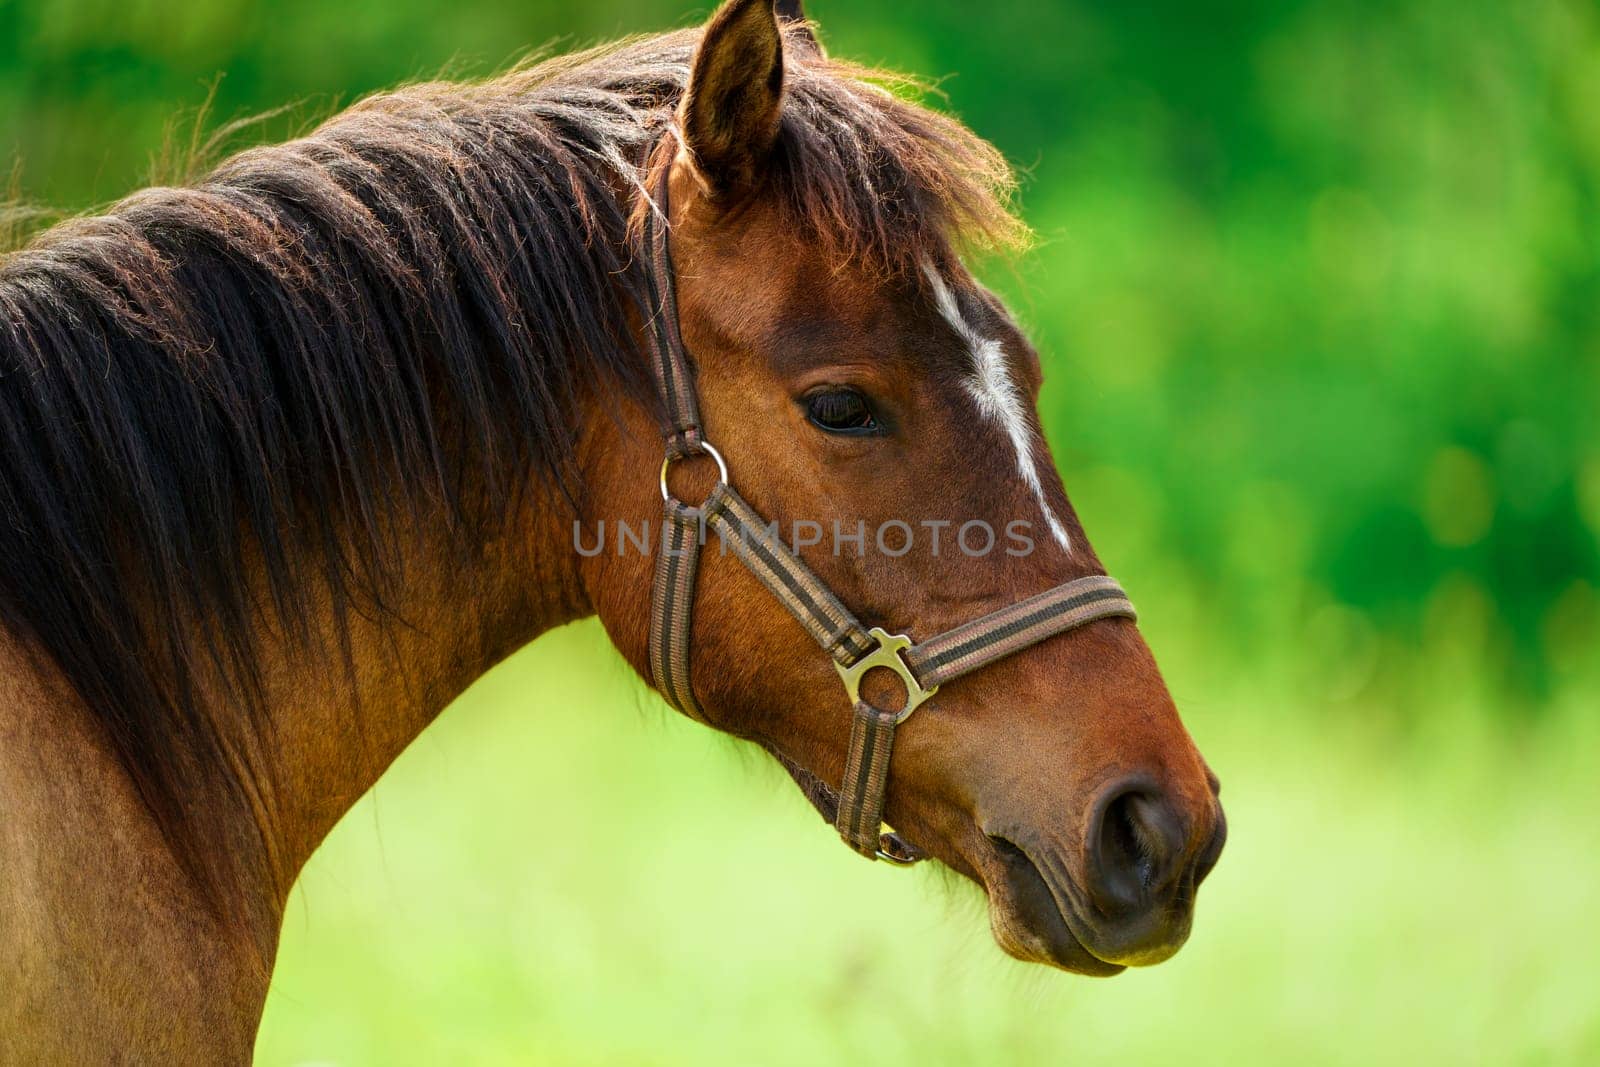 Majestic Beauty, A Close-Up Portrait of a Brown Horse against a Green Field. horse close up face by PhotoTime